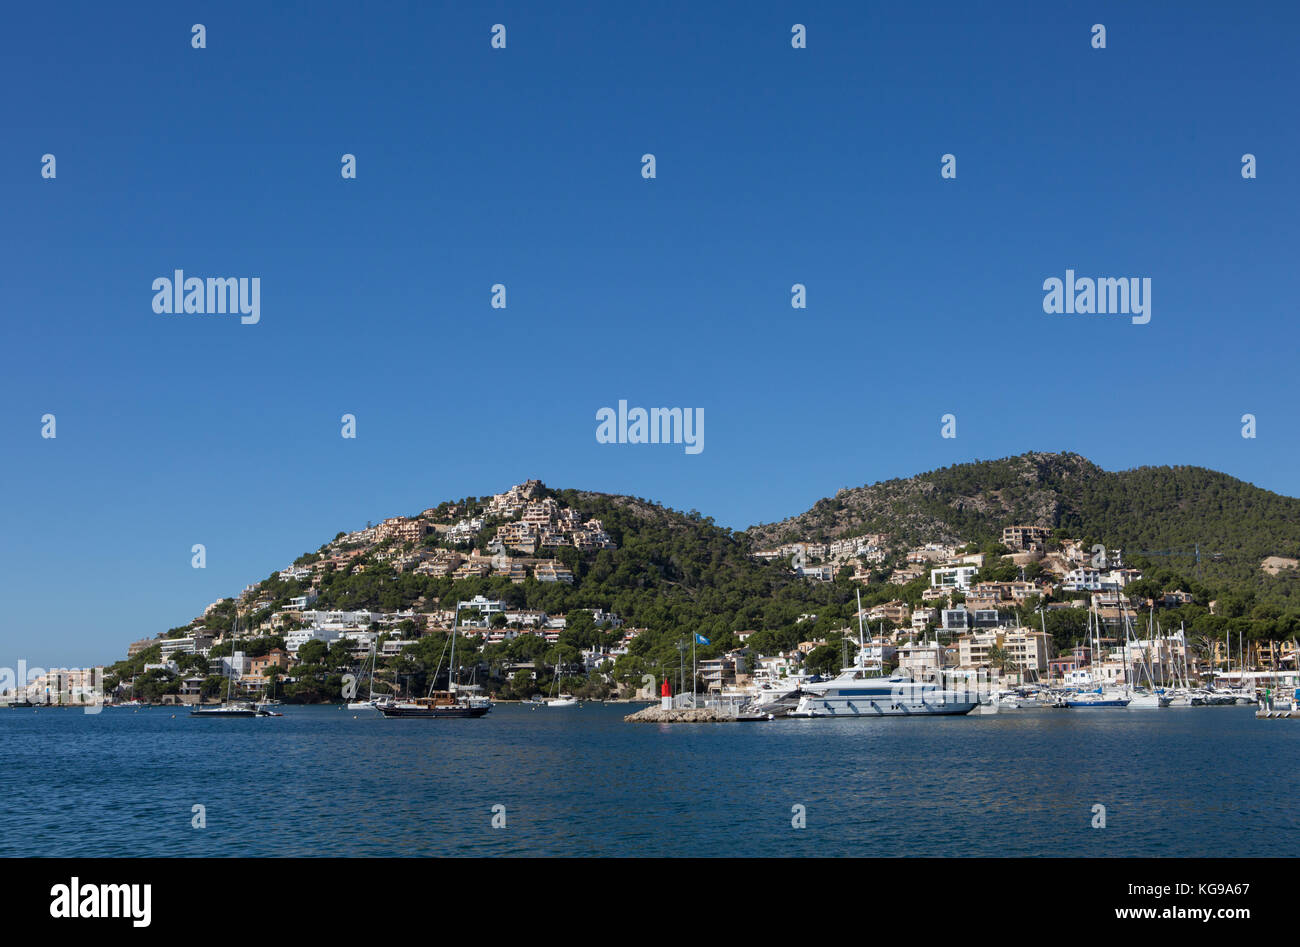 Boats moored at harbour, mountains and town in background, Port d' Andratx, Majorca, Balearic Islands, Spain. Stock Photo